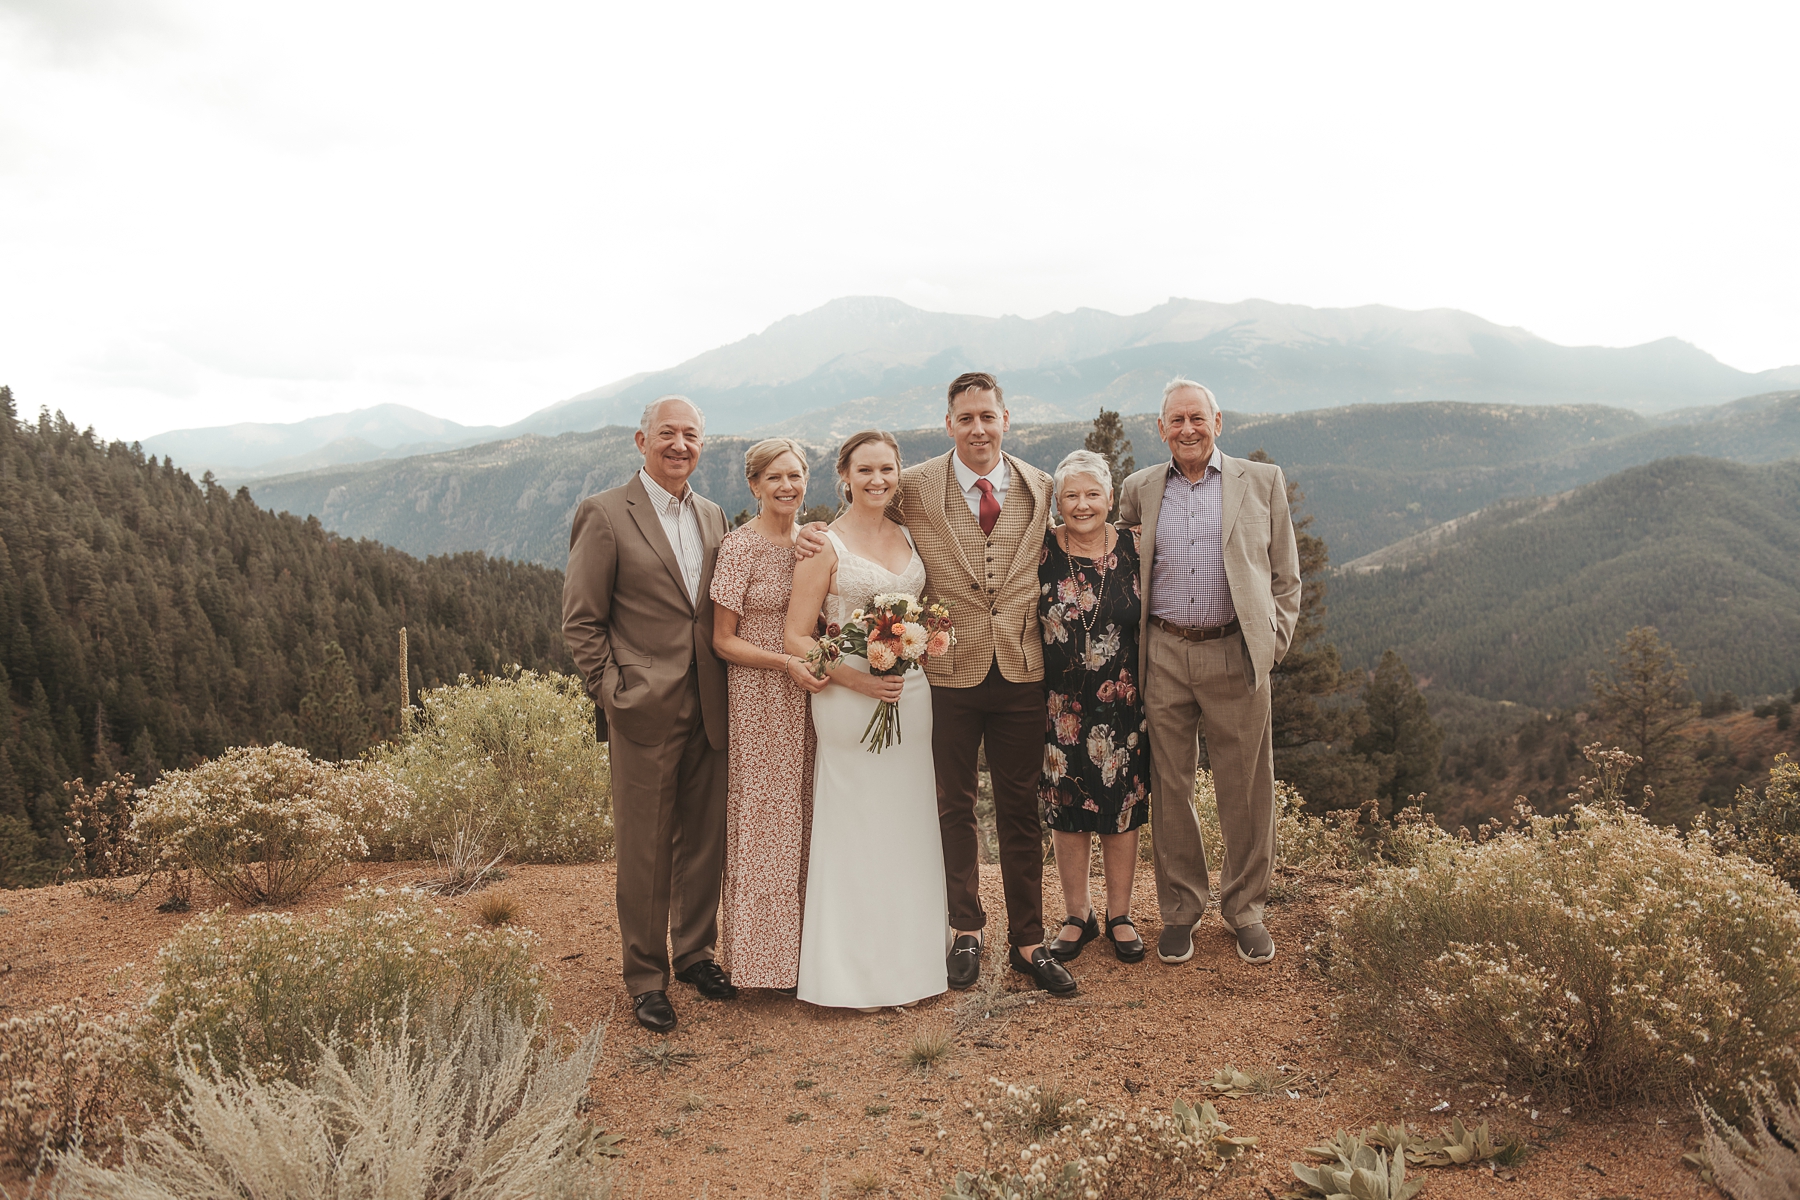 Bride and groom with family in front of mountains at Airbnb wedding venue in Colorado